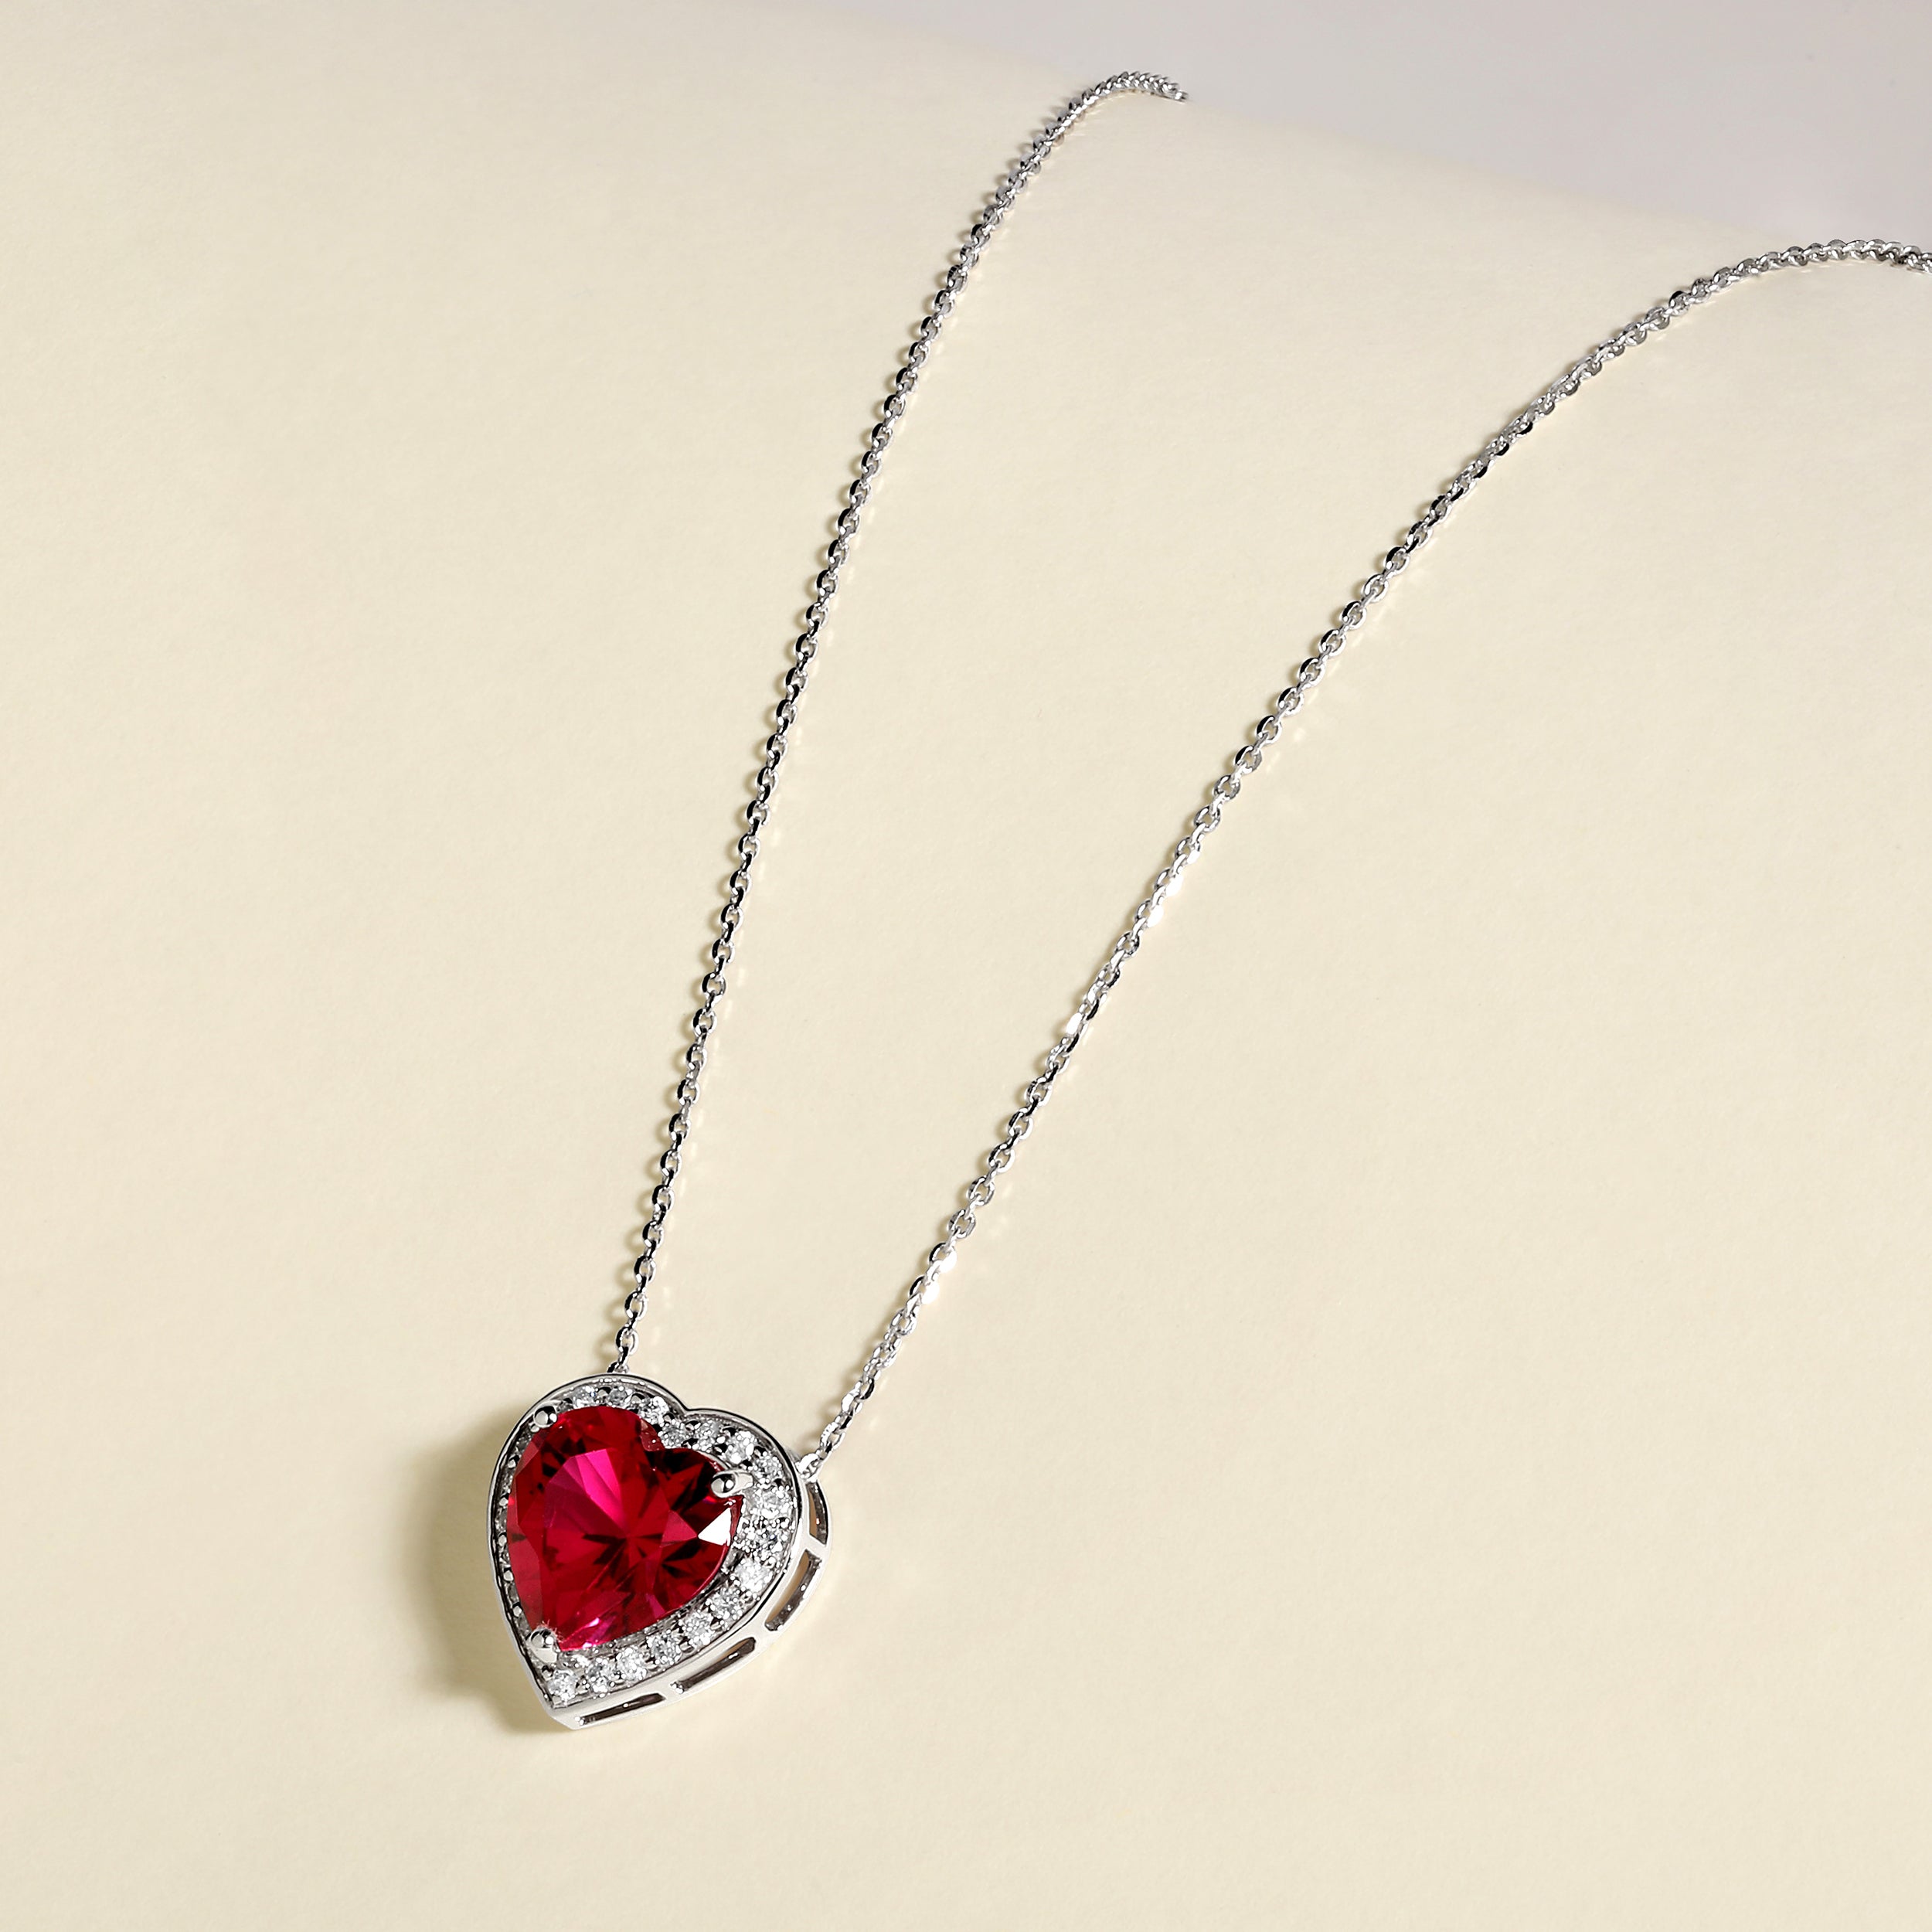 Certified 14K Gold 3.3ct Natural Diamond w/ Simulated Ruby Heart Halo White Necklace